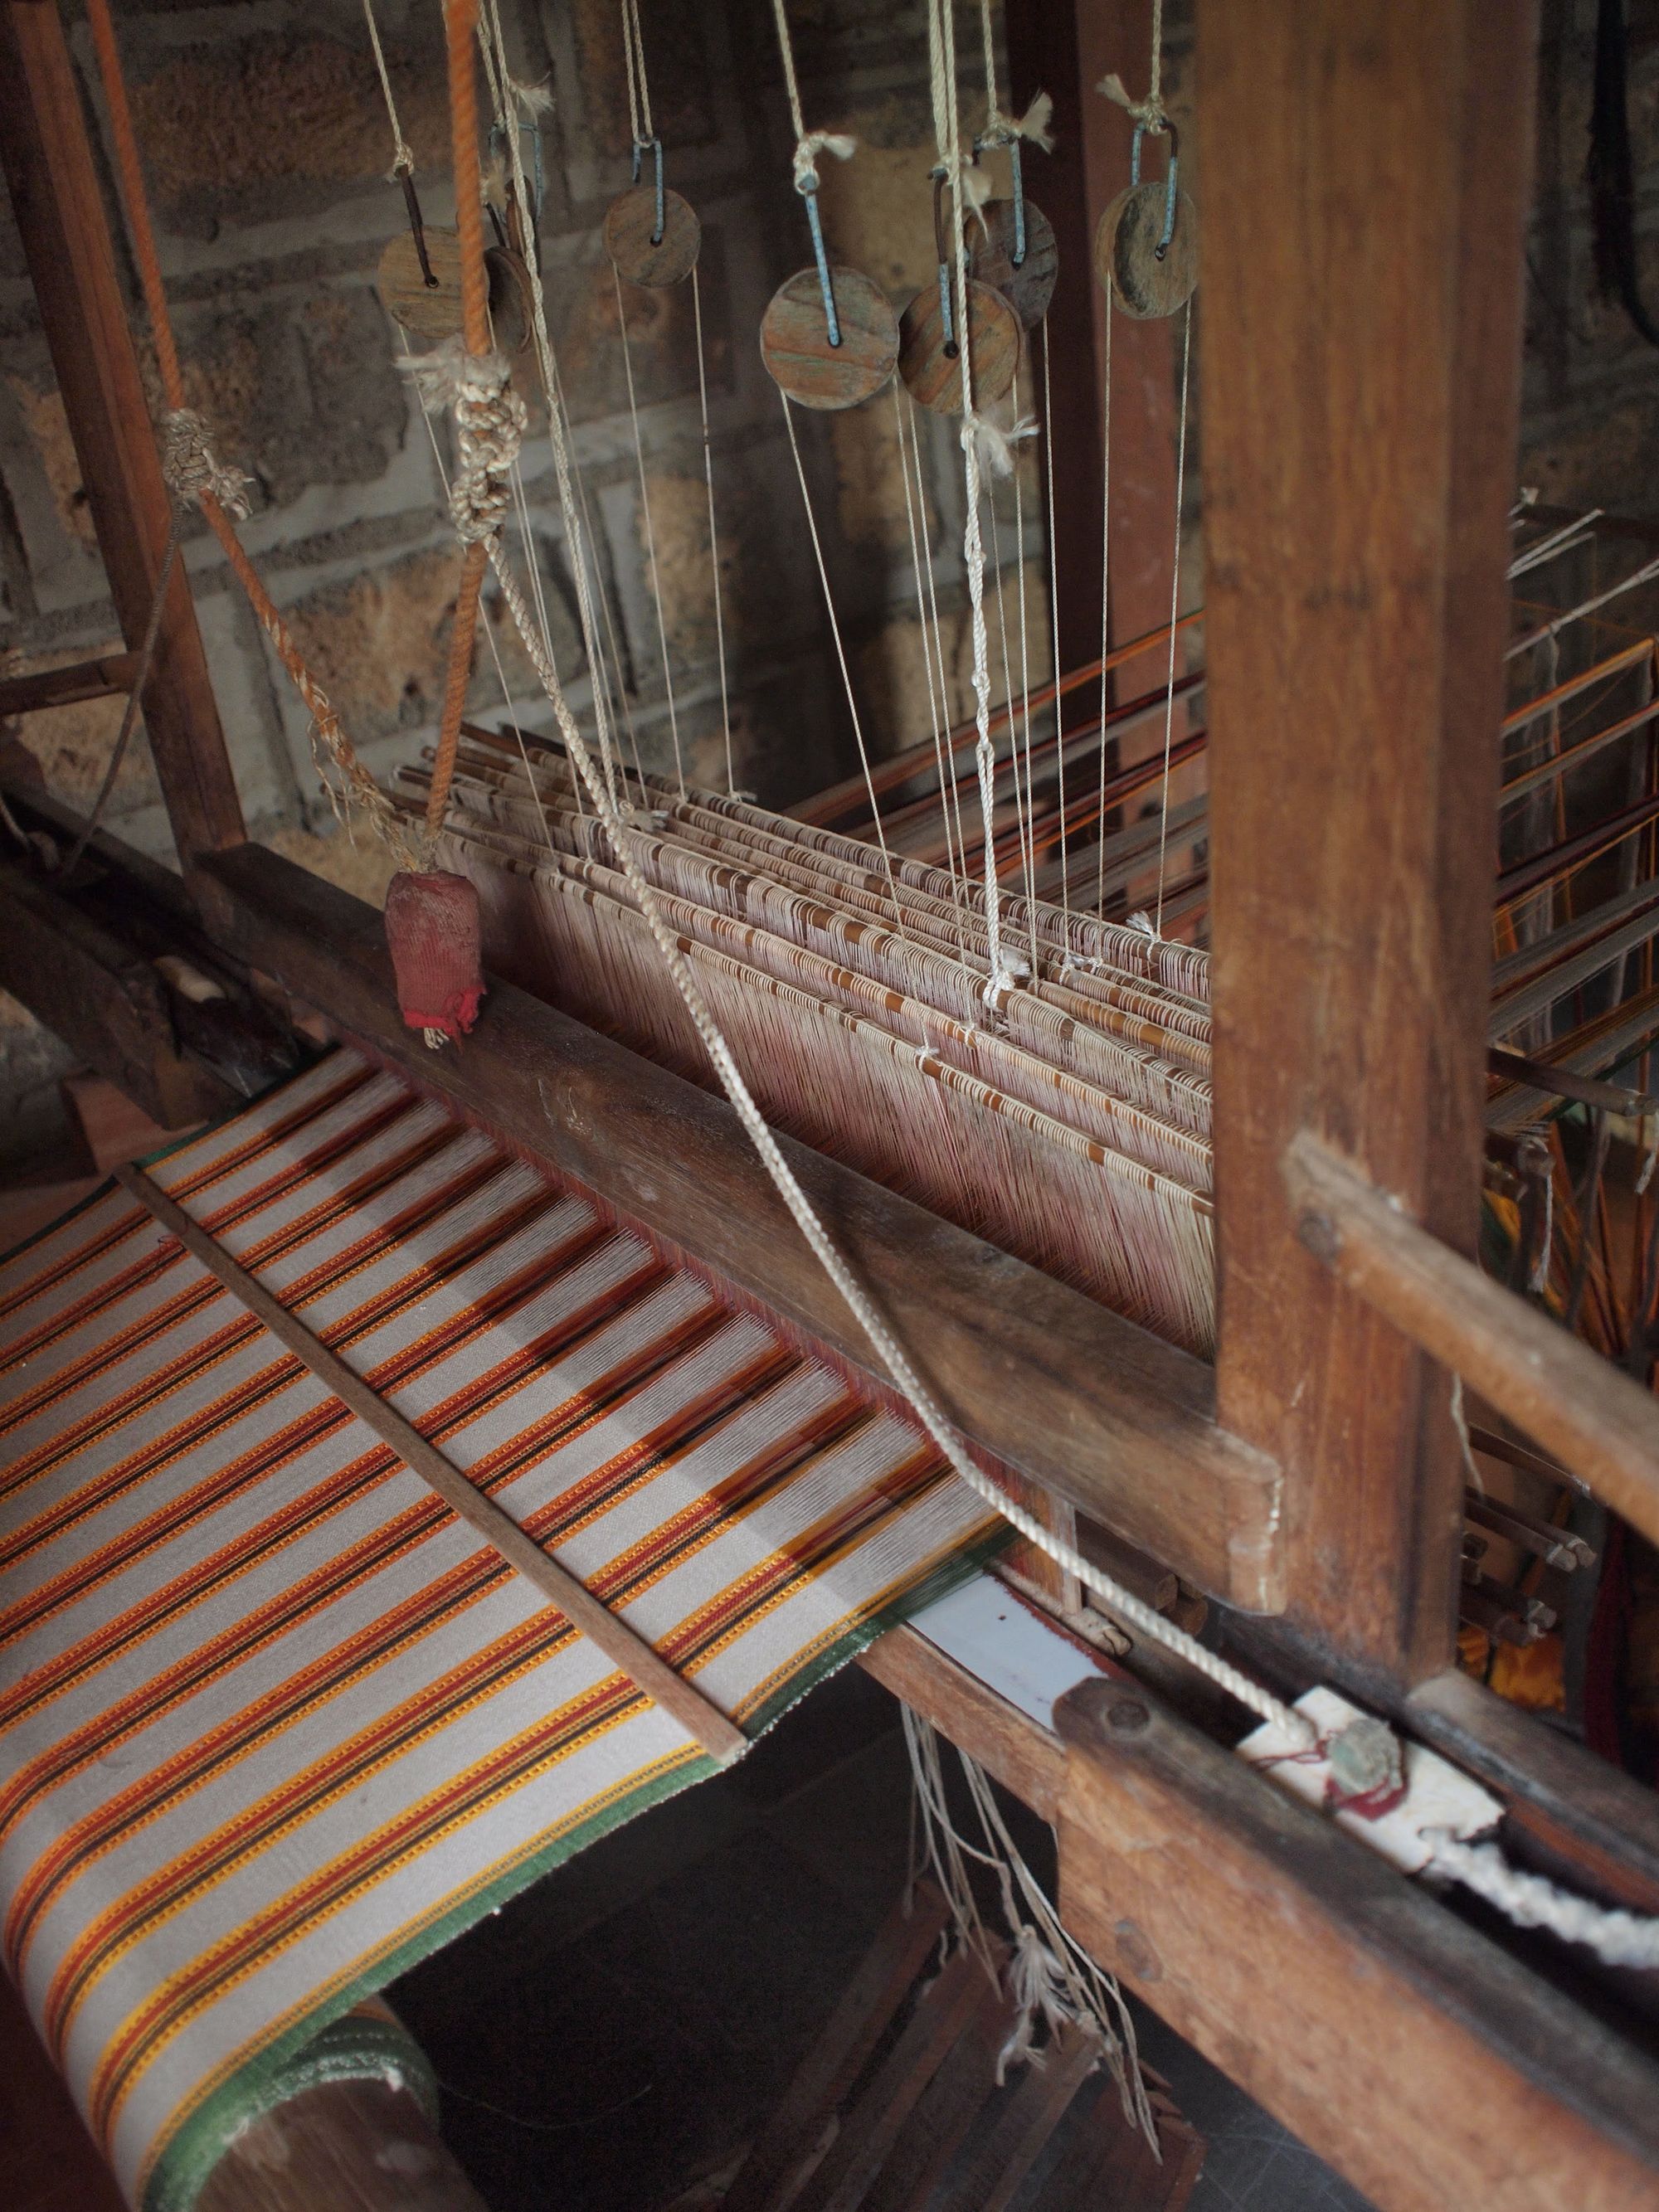 a close up image of a wooden loom with white, red, yellow and green striped fabric on it. 